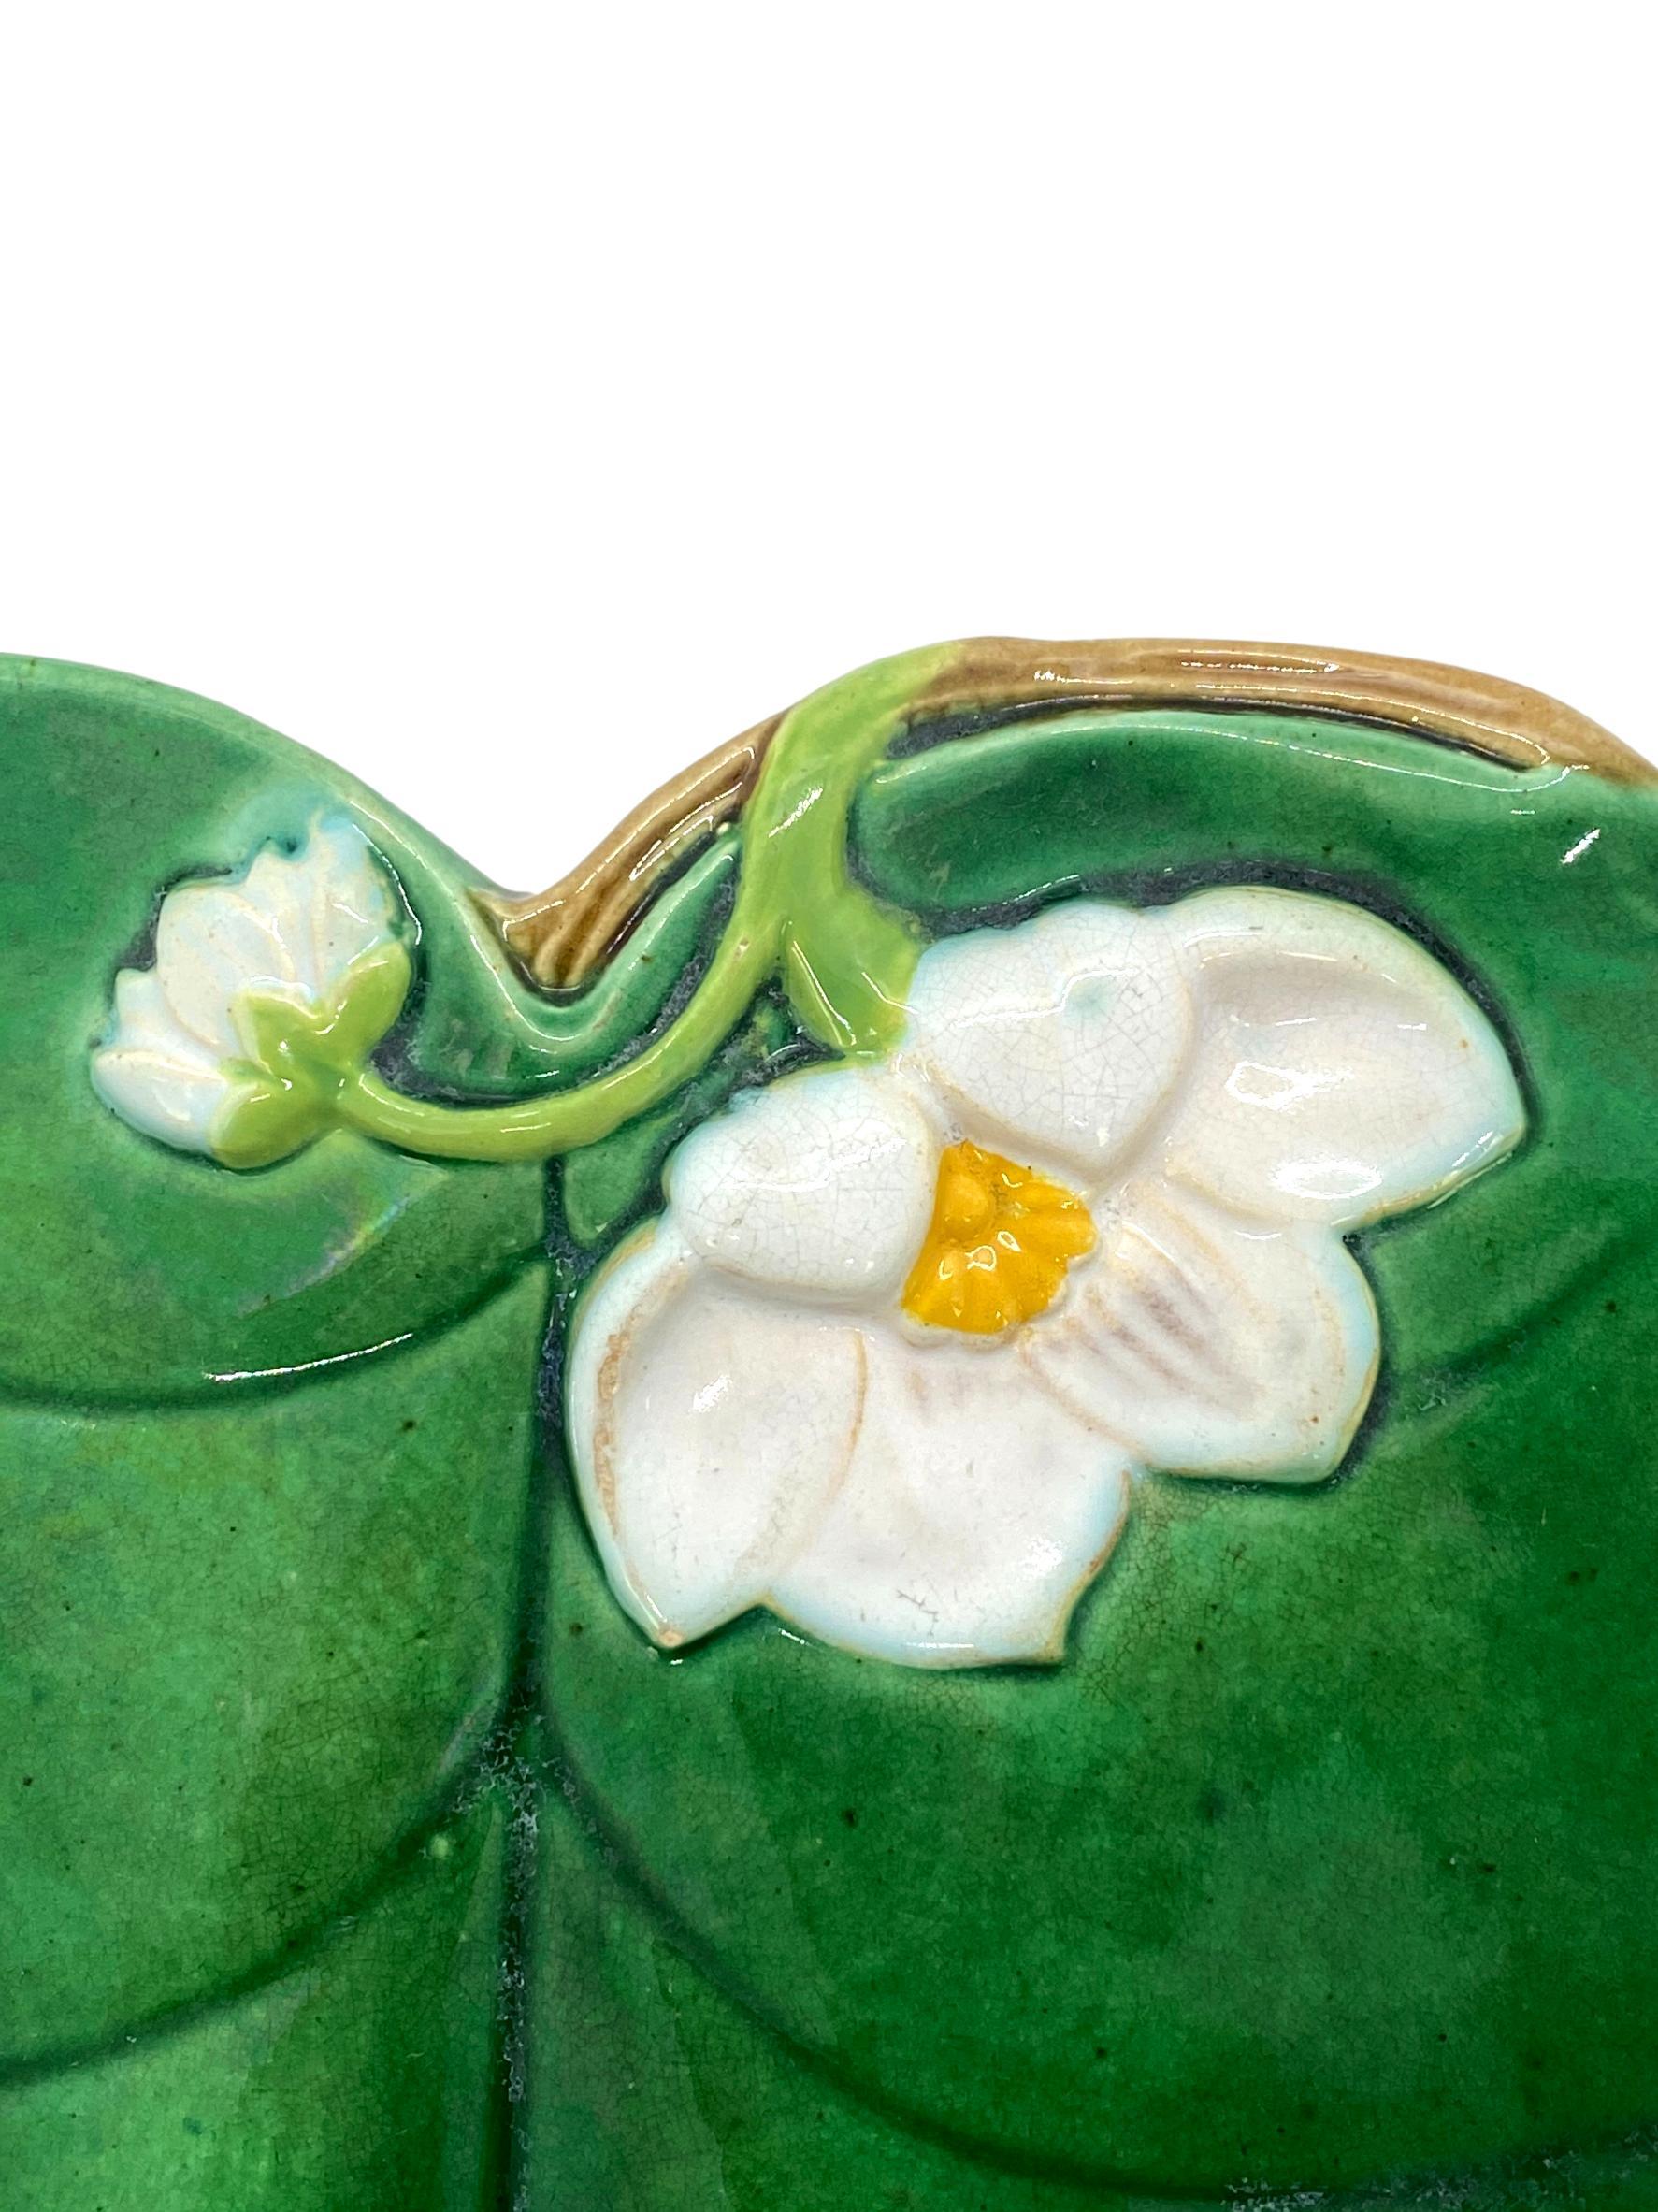 Late 19th Century George Jones Majolica Water Lily Plate in Lush Shades of Green, English, 1877